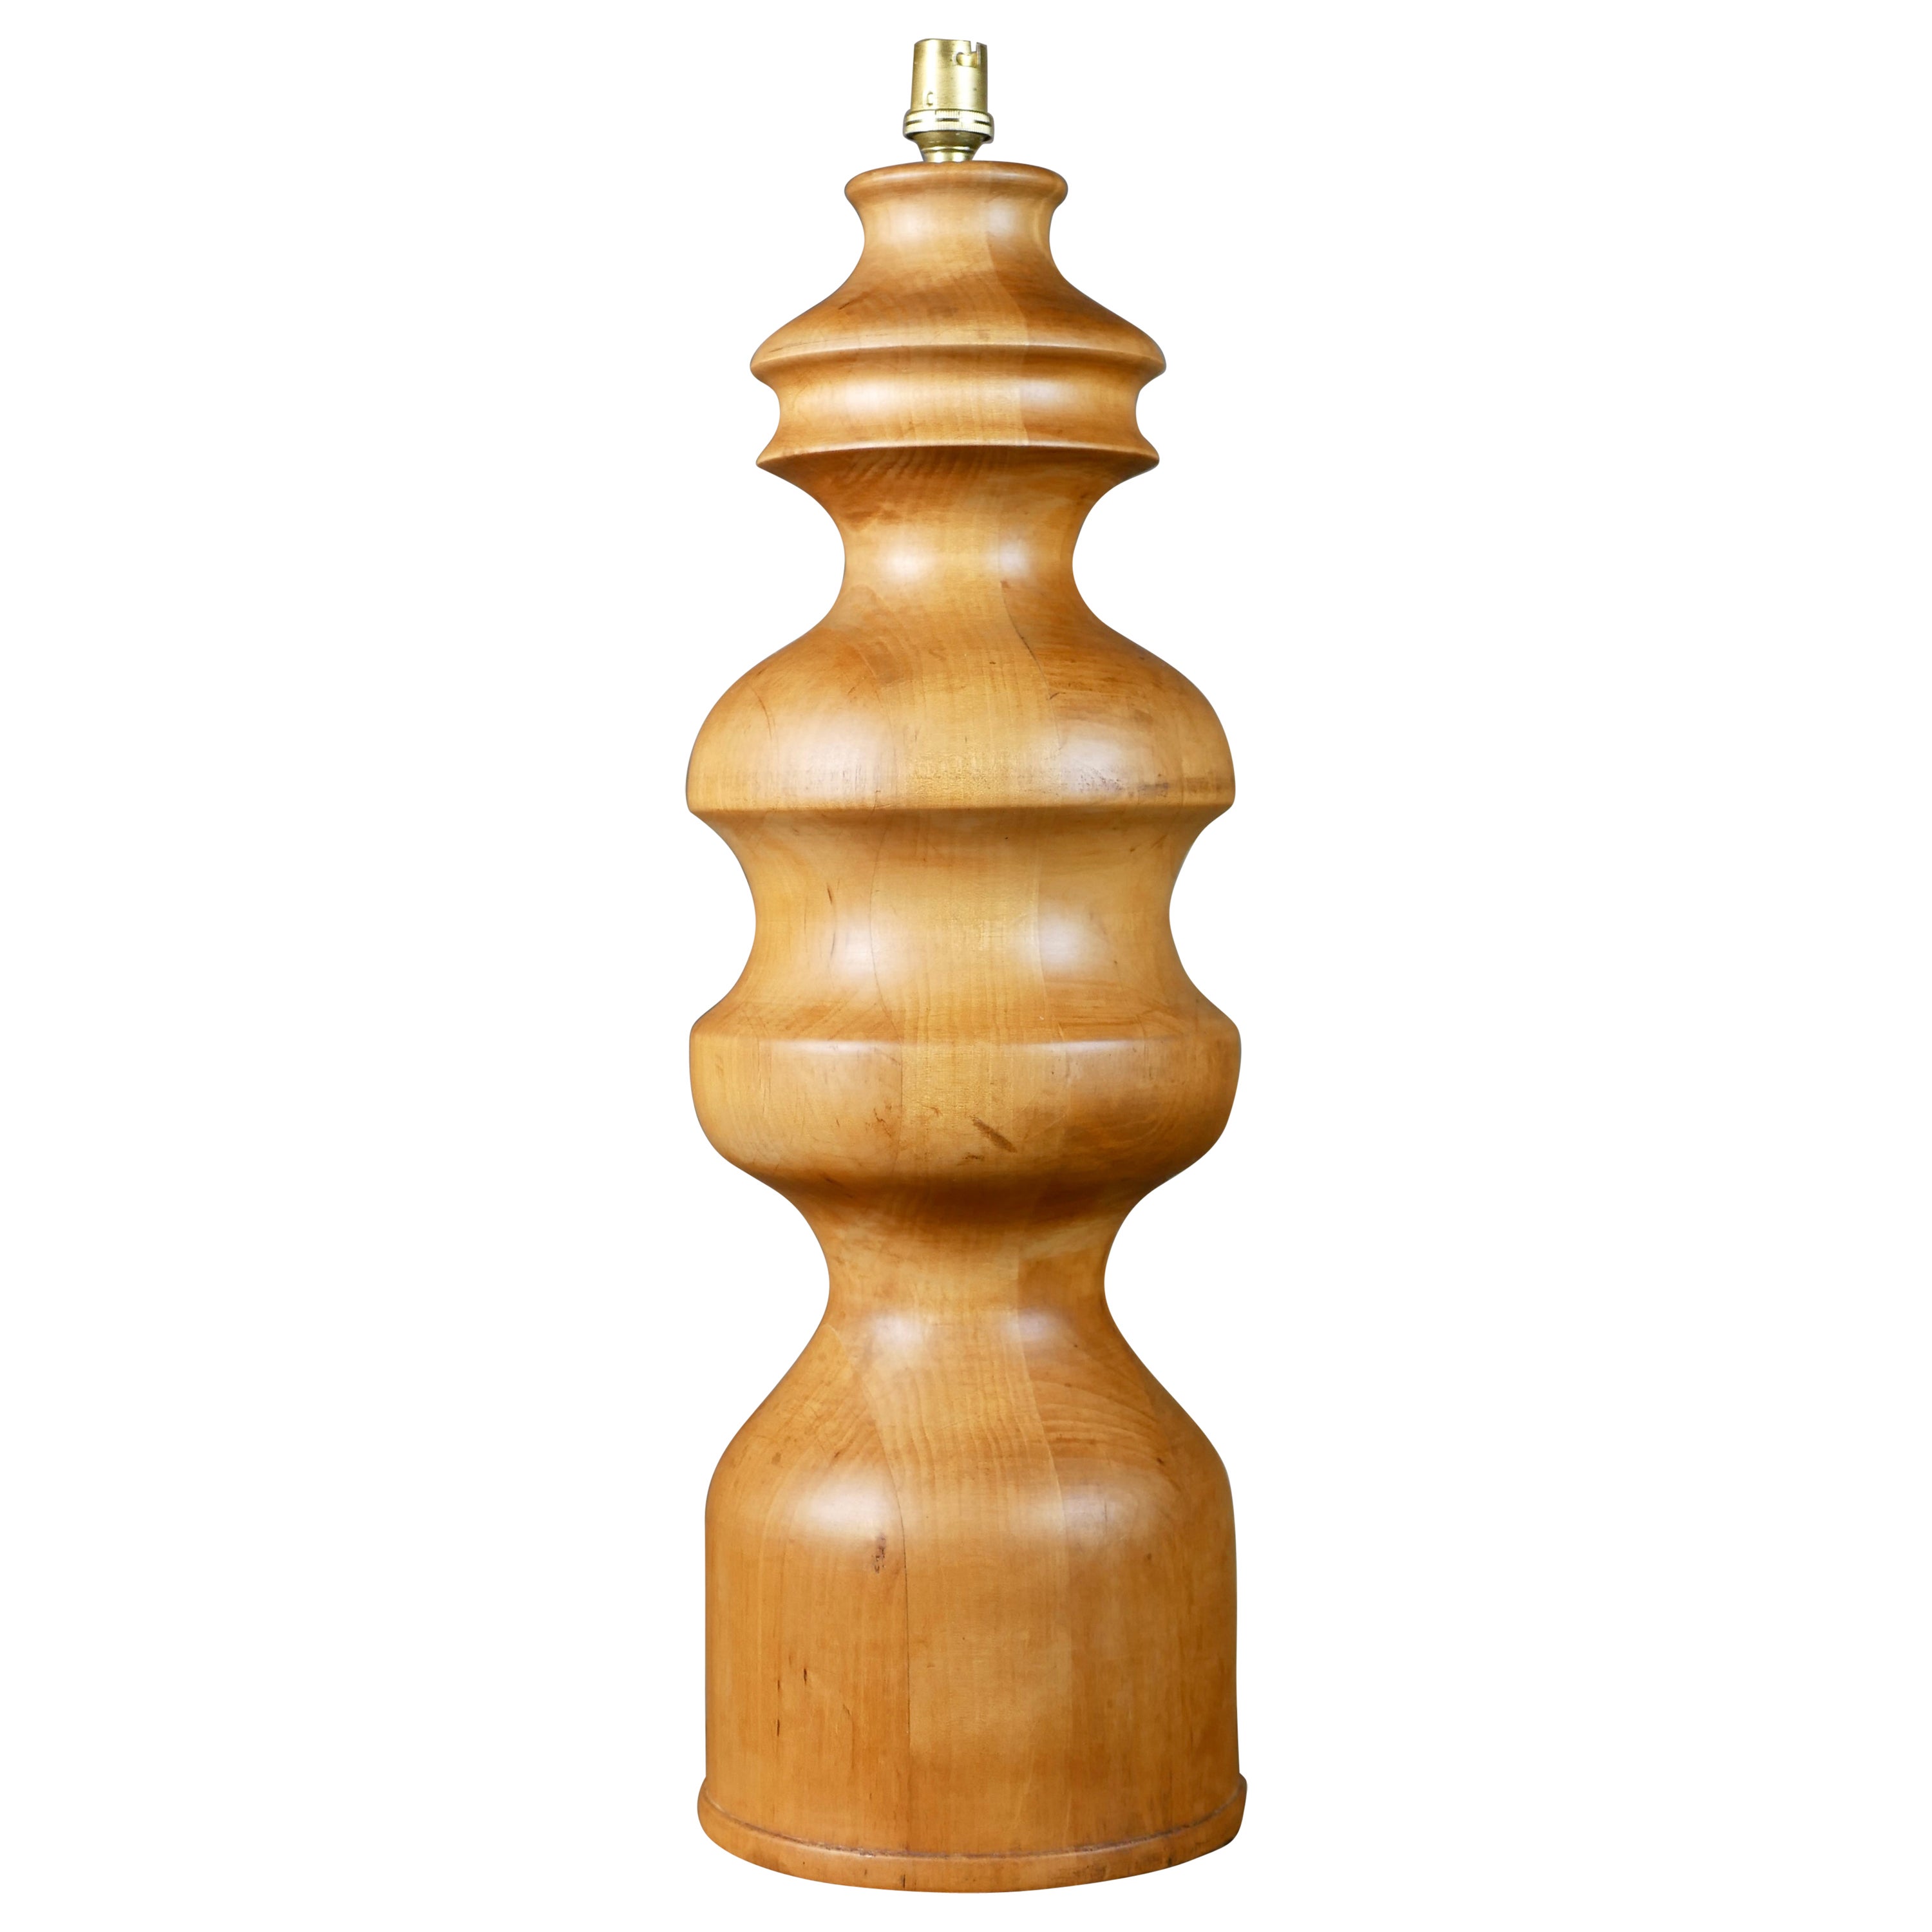 Large oak base lamp, anonymous work made in France in the 1960s.
Beautiful craftsman work with these multiple pieces of wood assembled then turned to make it an imperfect yet perfect work of art.
Traces of time.
With or without the